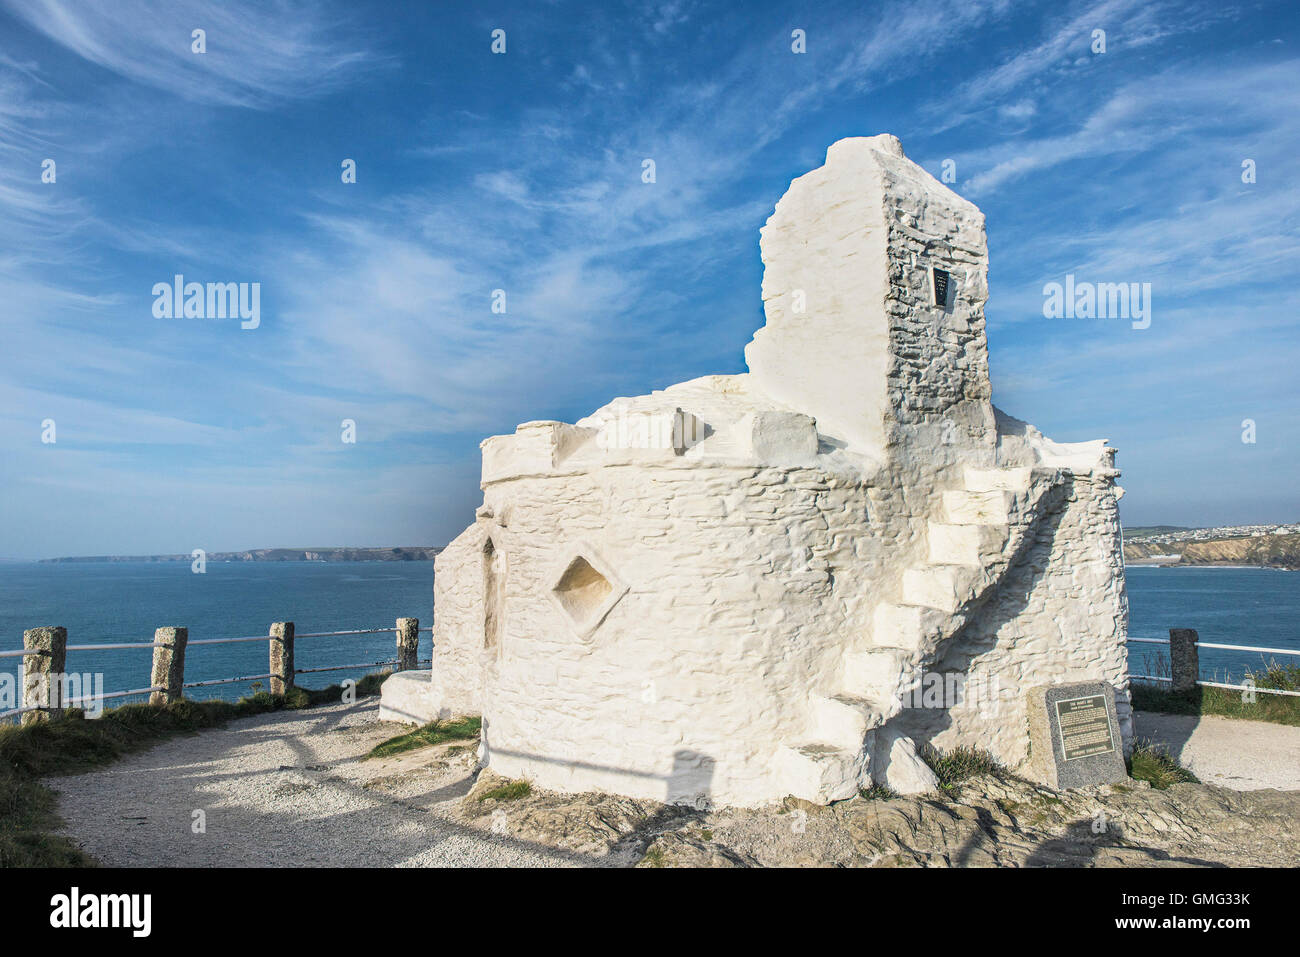 The Grade II listed Huer’s Hut on the coast of Newquay in Cornwall. Stock Photo